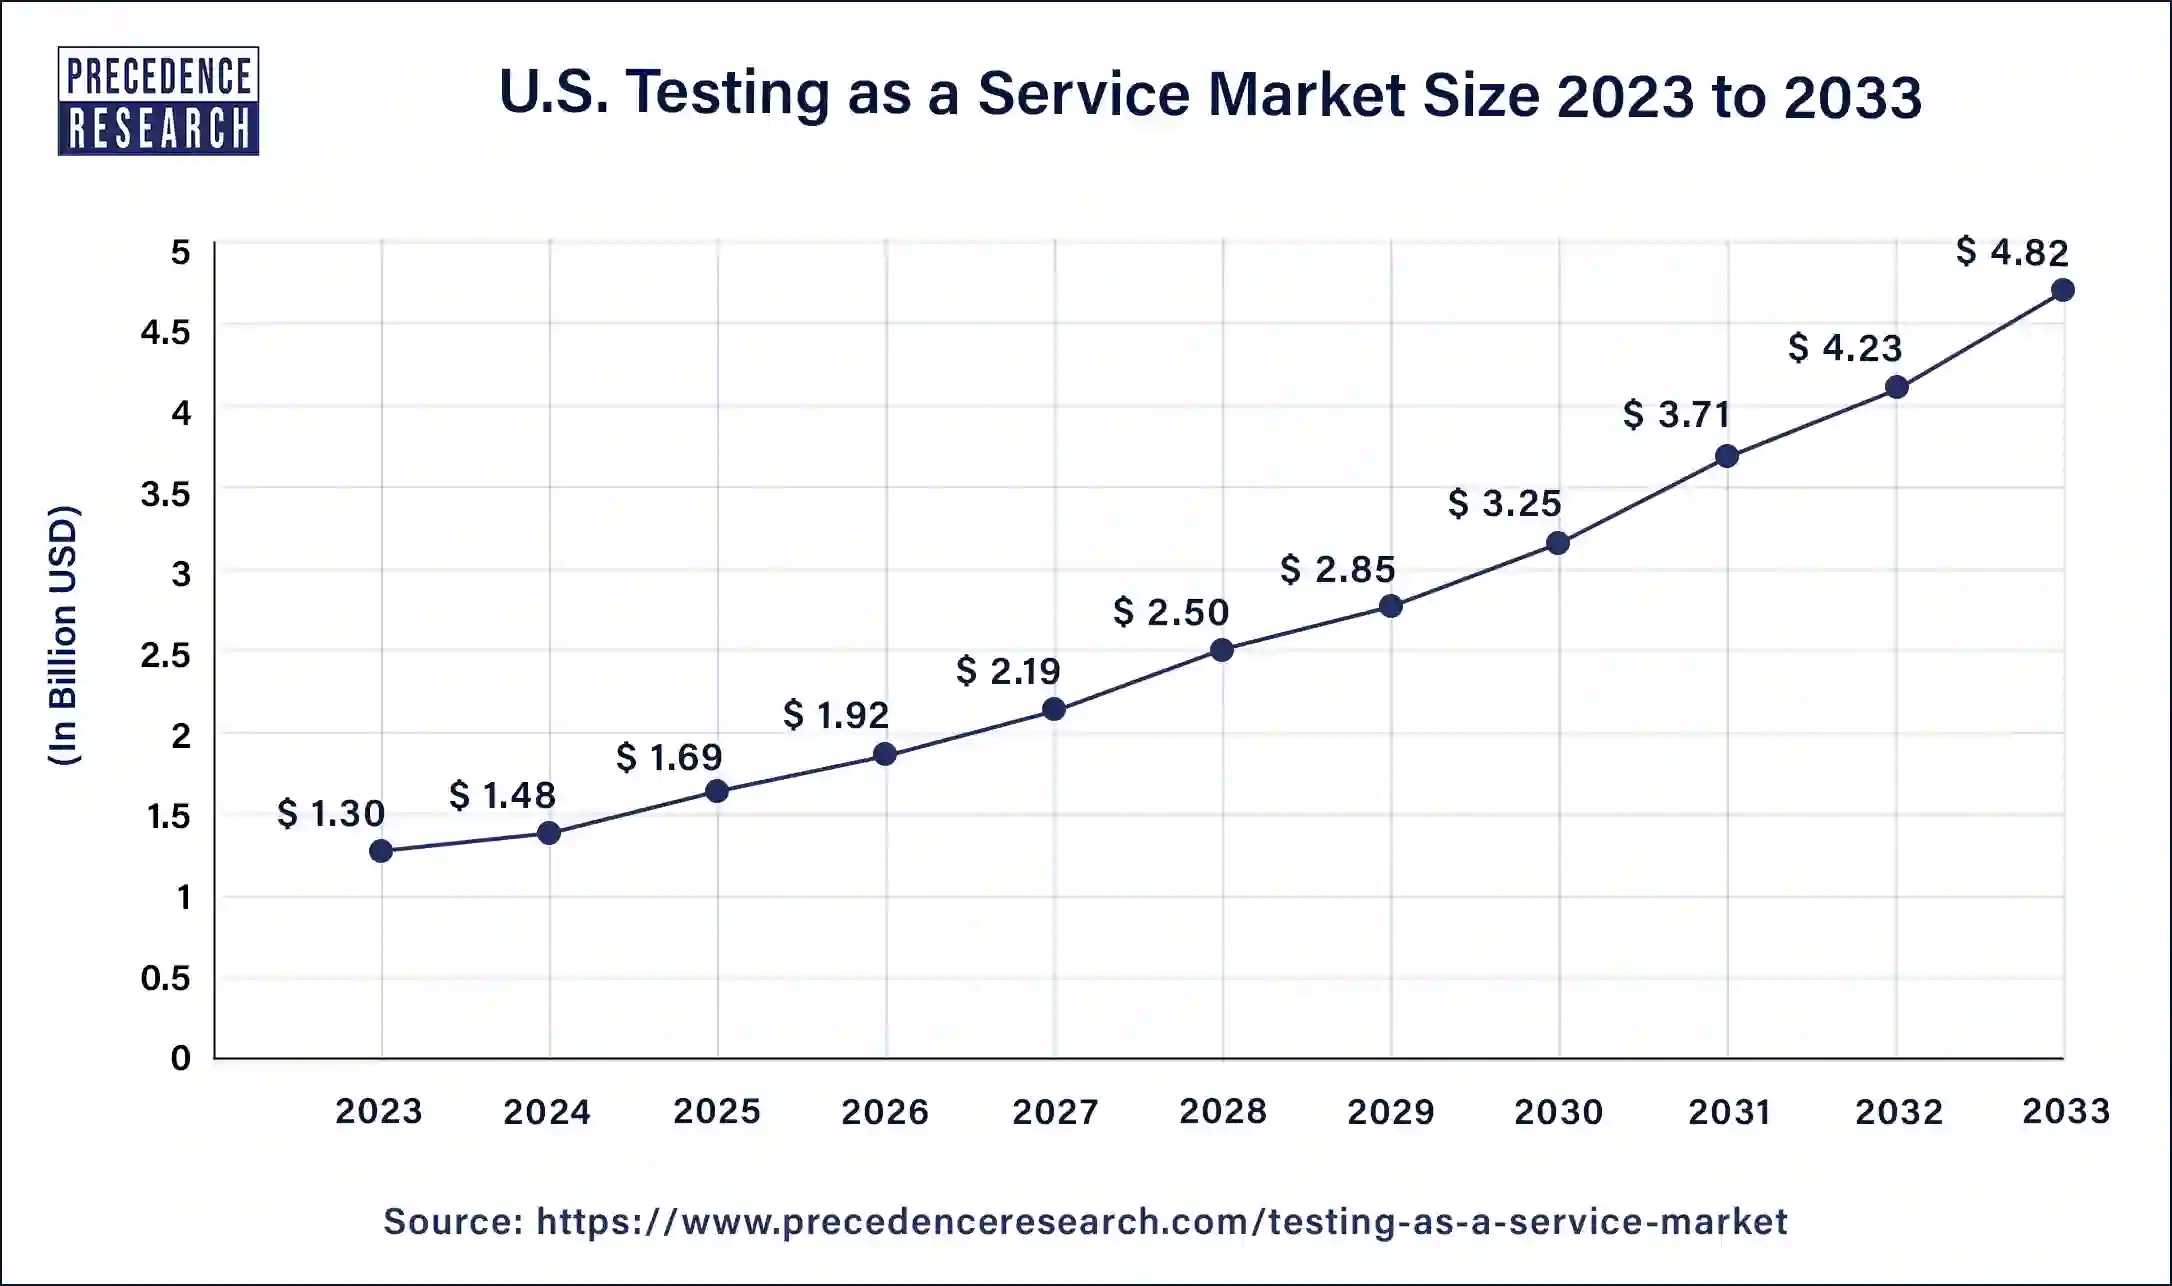 U.S. Testing as a Service Market Size 2024 to 2033